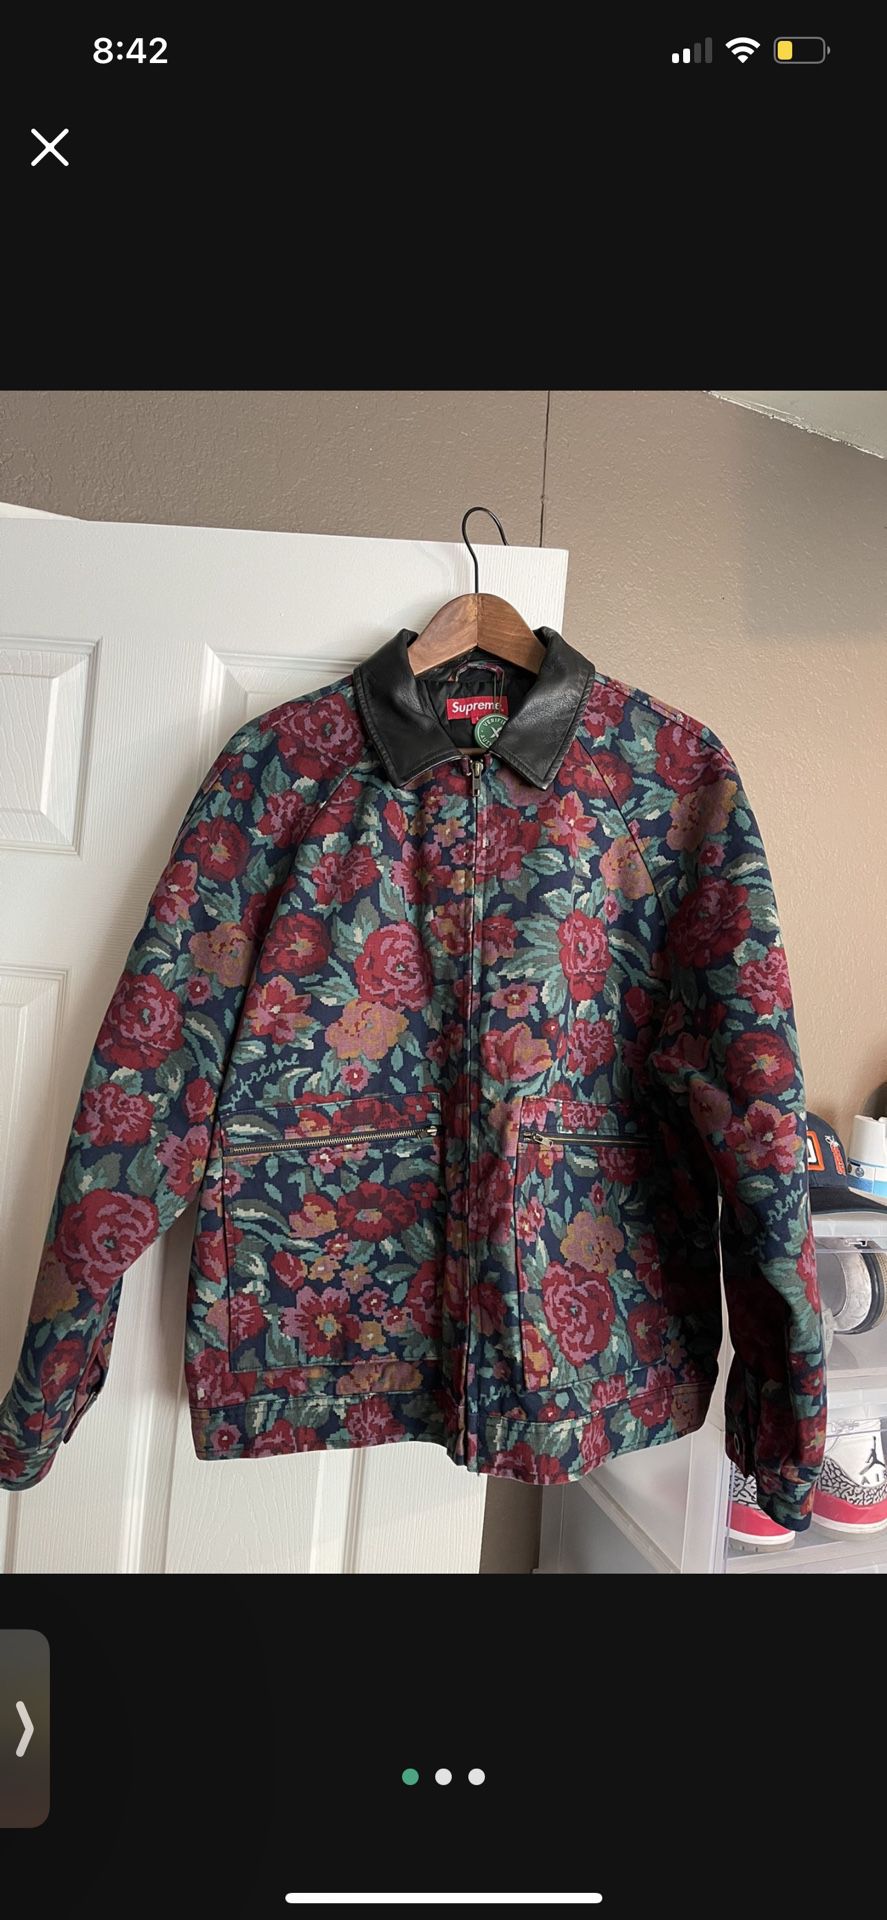 Supreme Floral Leather Collar Work Jacket FW20 for Sale in Chula